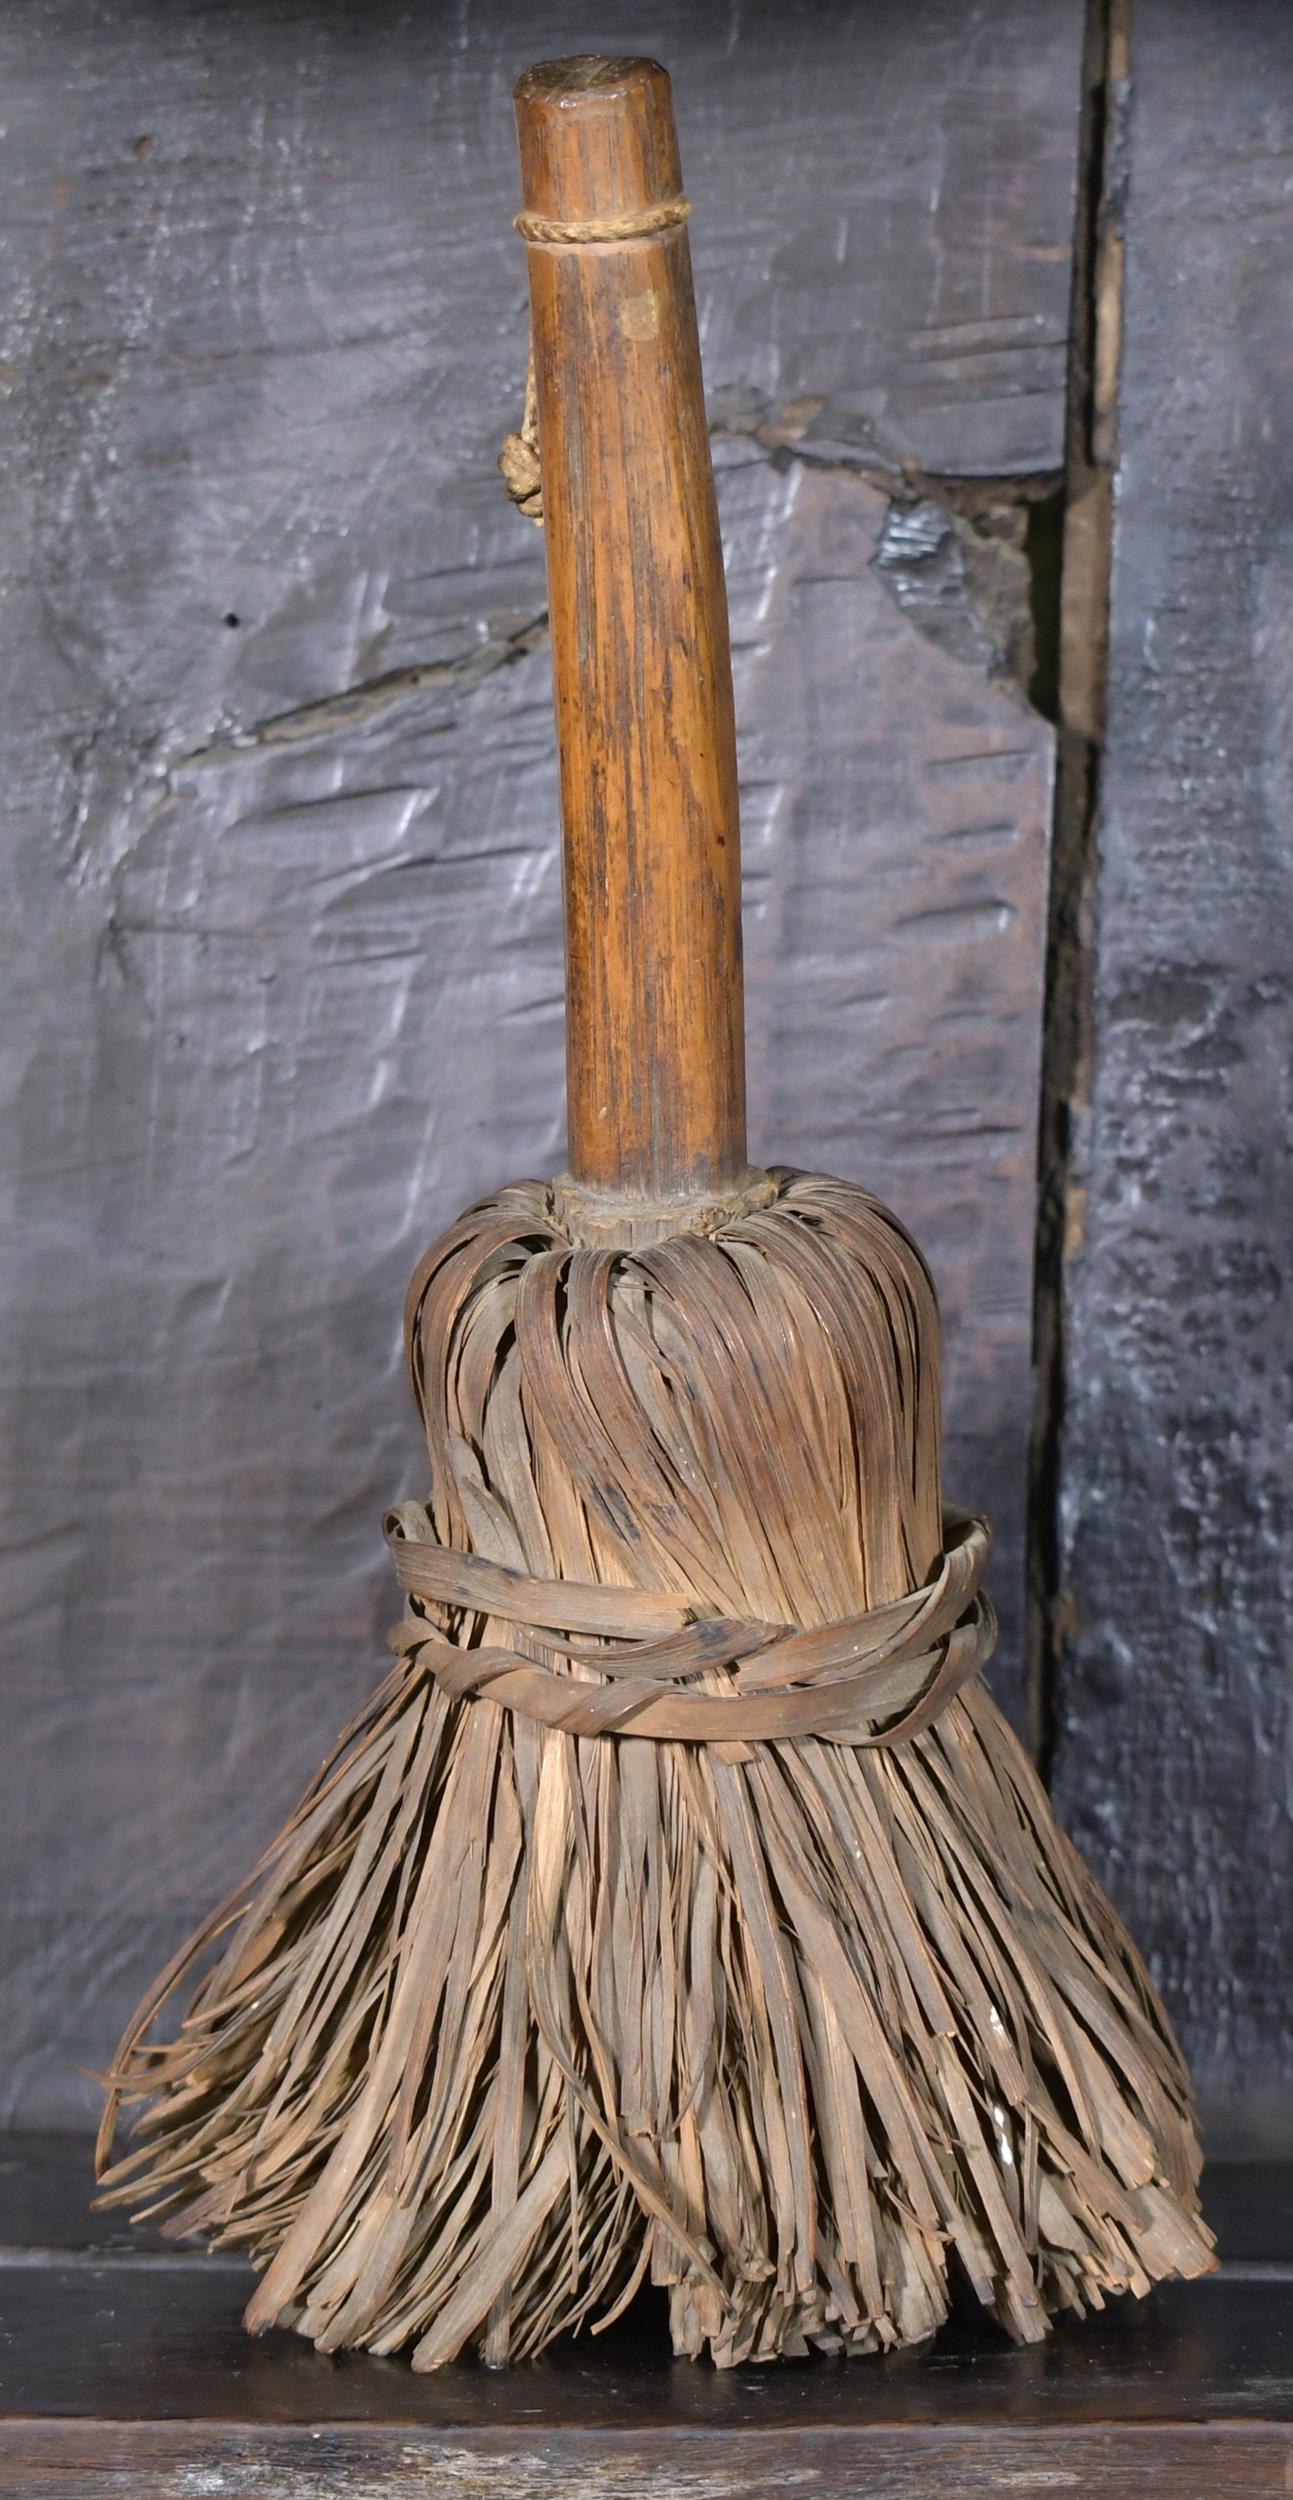 19TH C. CARVED WOOD BROOM. Carved from